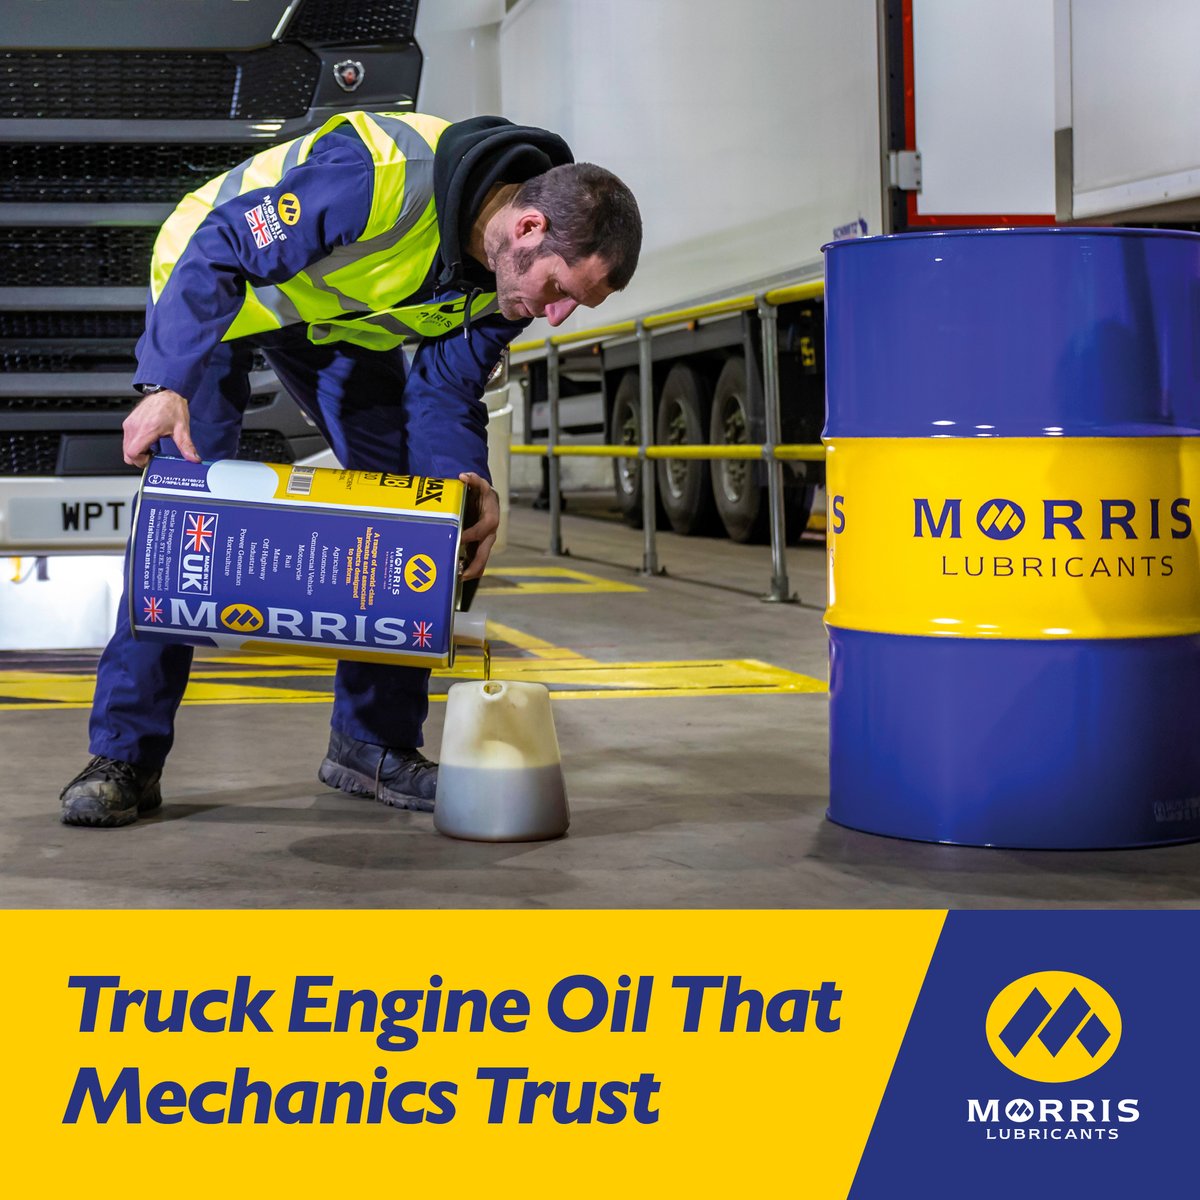 Using the correct @Morrisoil engine oil is critical for your commercial vehicles, trucks, HGVs & buses. @guymartinracing knows only quality oils will do for his vehicles. See the full range of Morris Lubricants' commercial vehicle engine oils here: ow.ly/HhbI50QF5lA